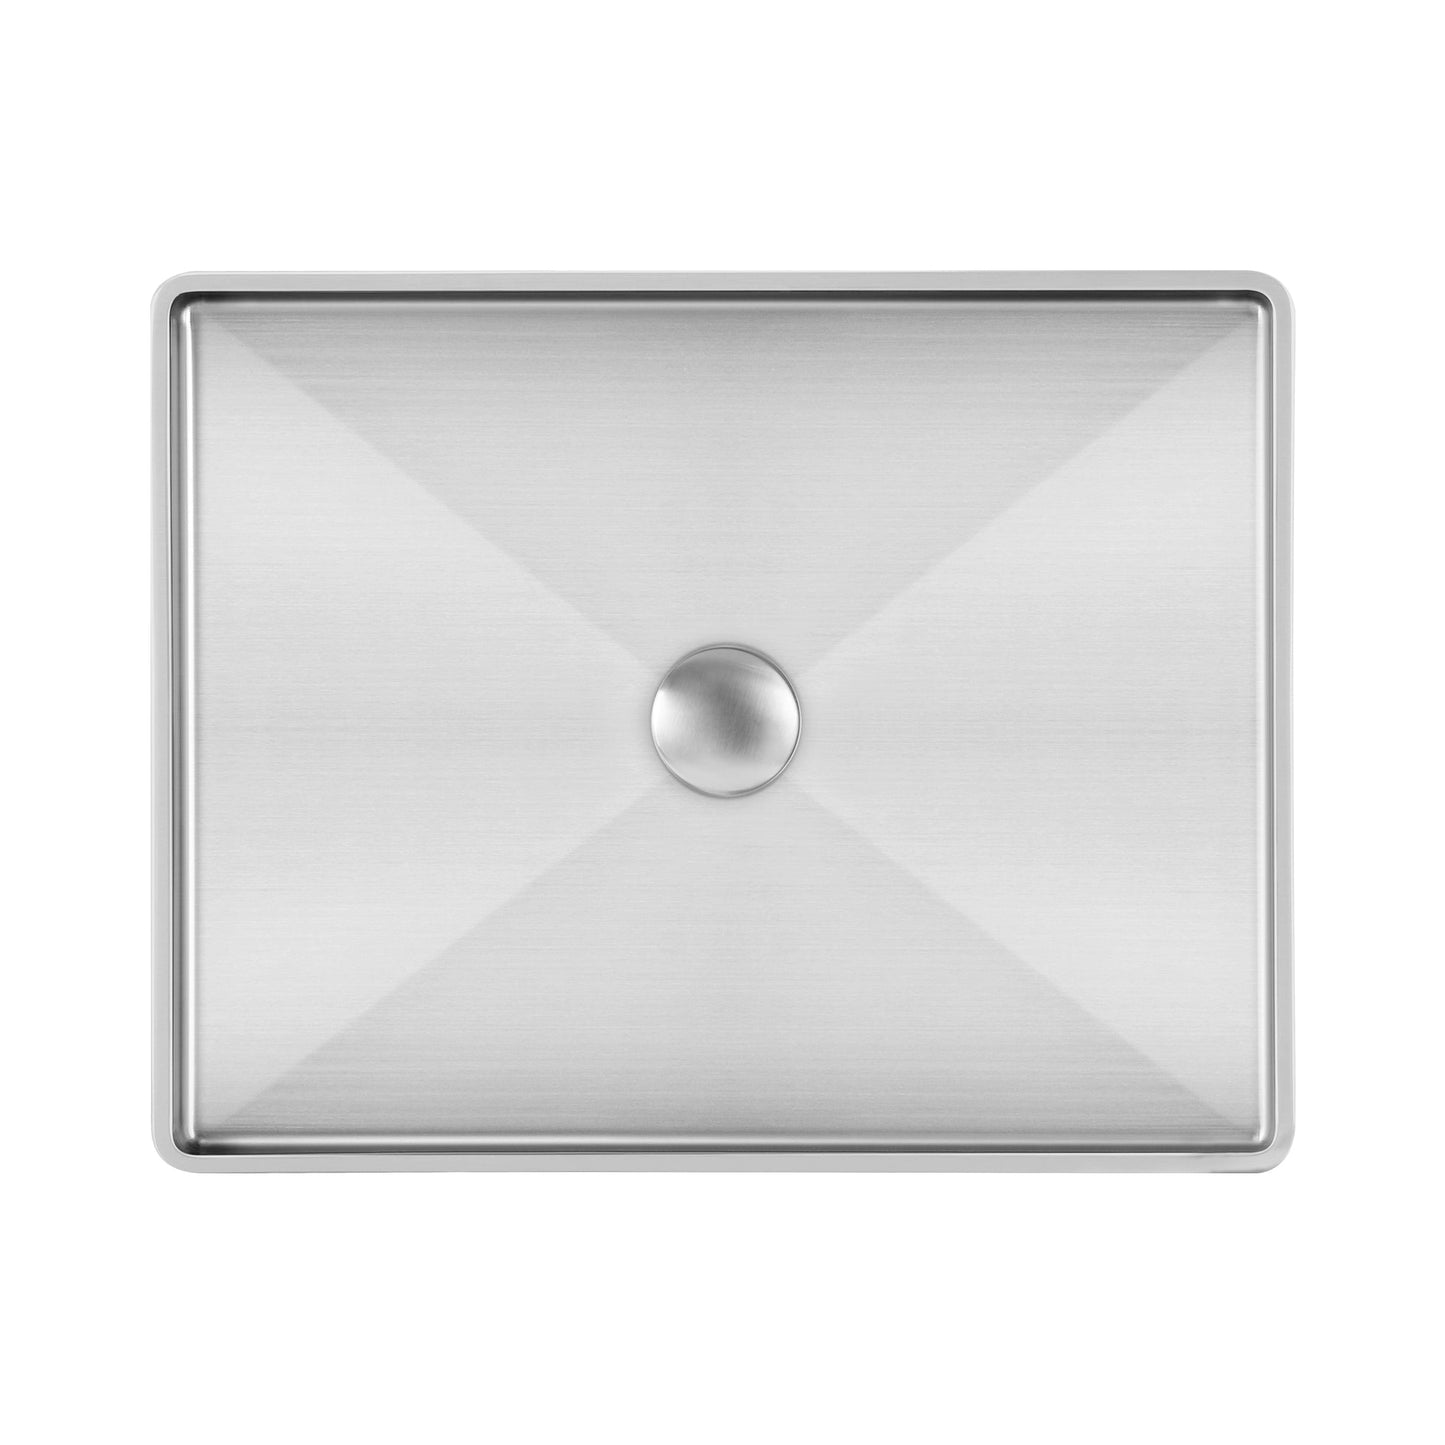 Whitehaus Noah Plus WHNPL1578-BSS Rectangular Brushed Stainless Steel Above Mount Basin Set With Center Drain